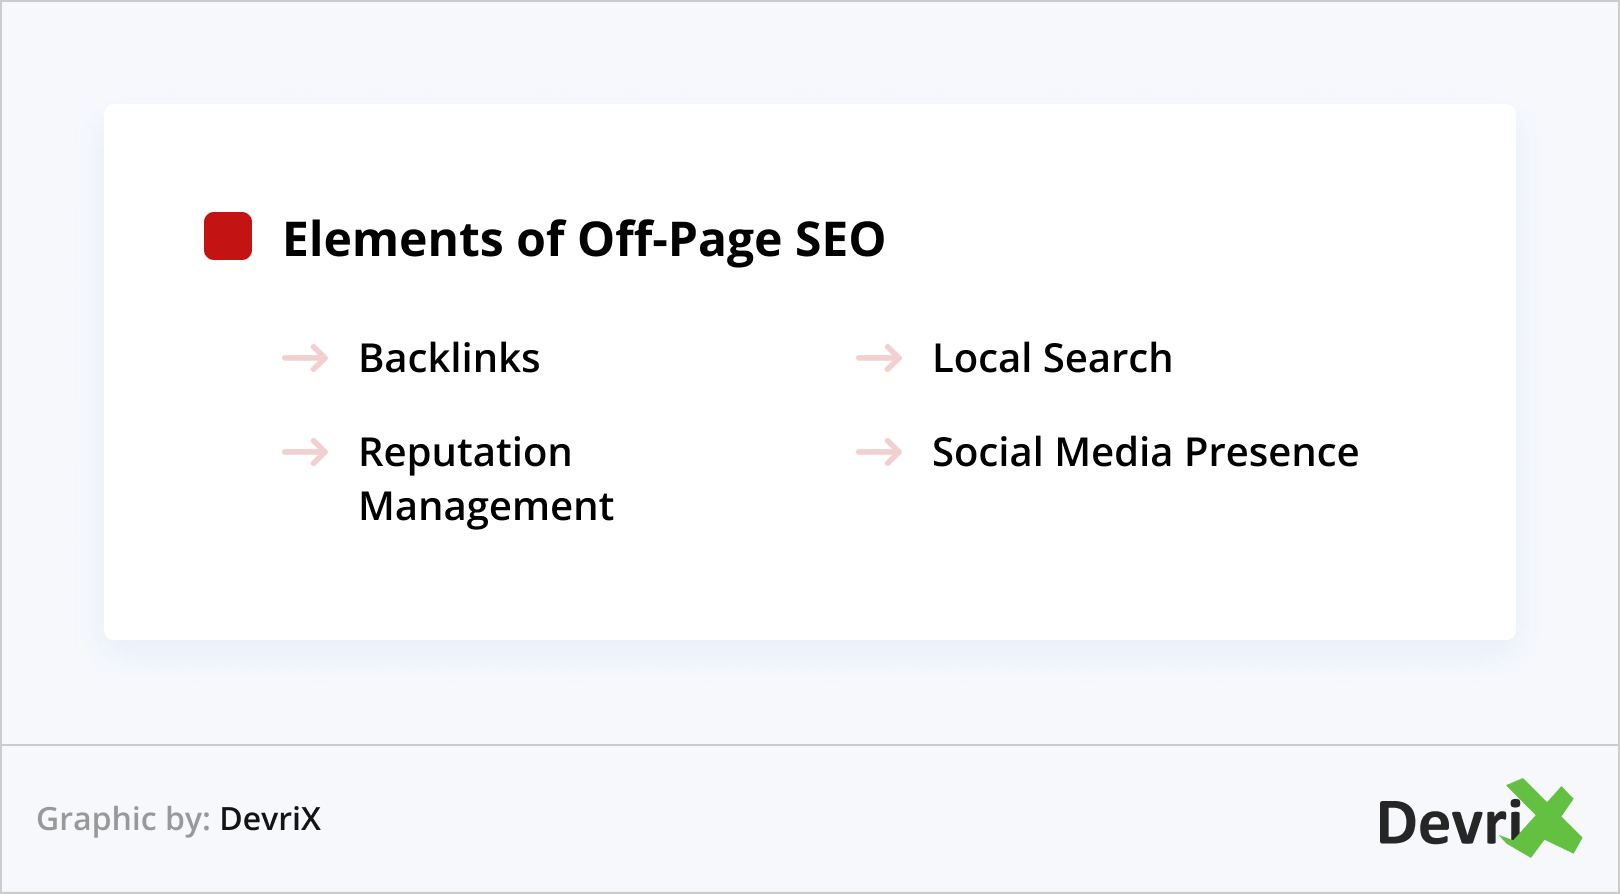 Elements of Off-Page SEO